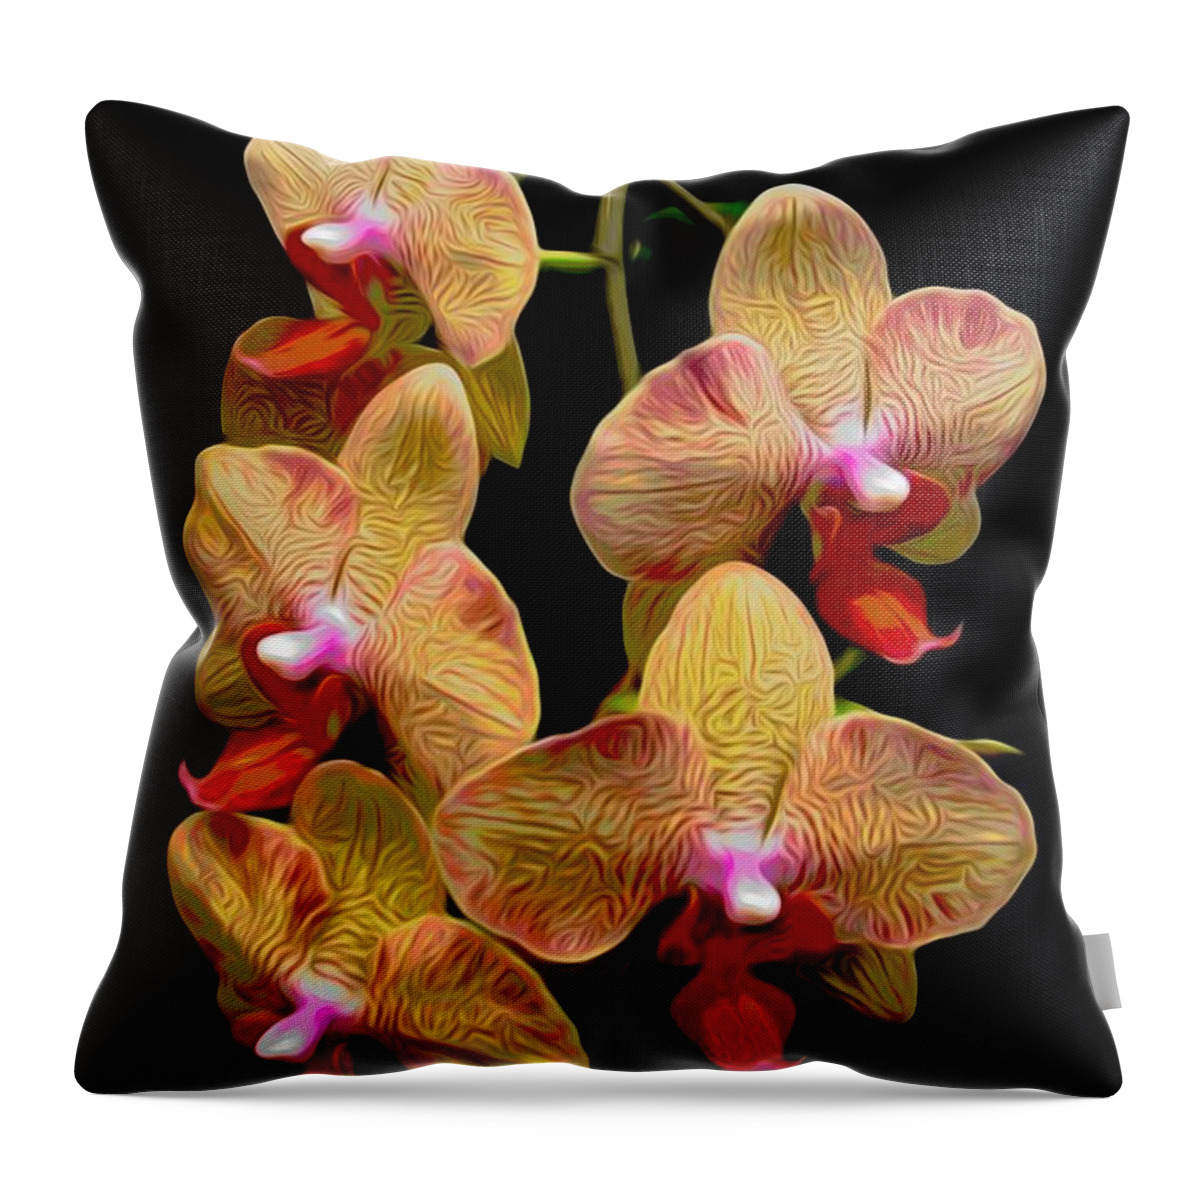 Orange Phalaenopsis Orchids With Chinese Lantern Effect Throw Pillow featuring the photograph Orange Phalaenopsis Orchids with Chinese Lantern Effect by Rose Santuci-Sofranko